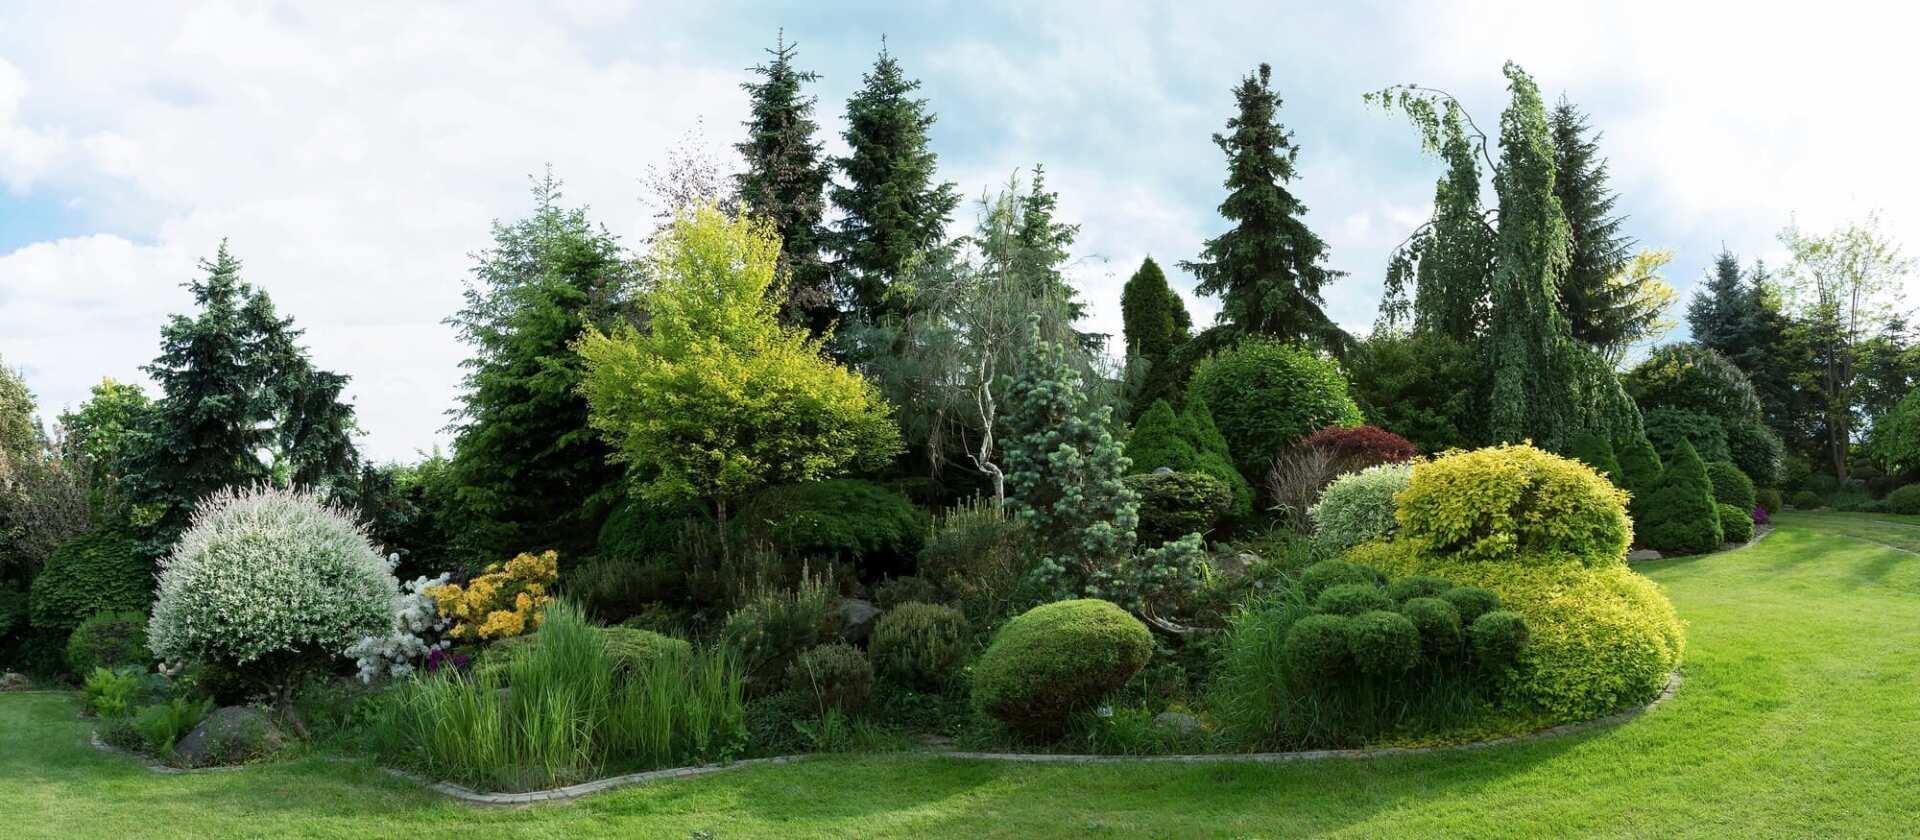 How To Create a Personal Forest Oasis in Your Yard